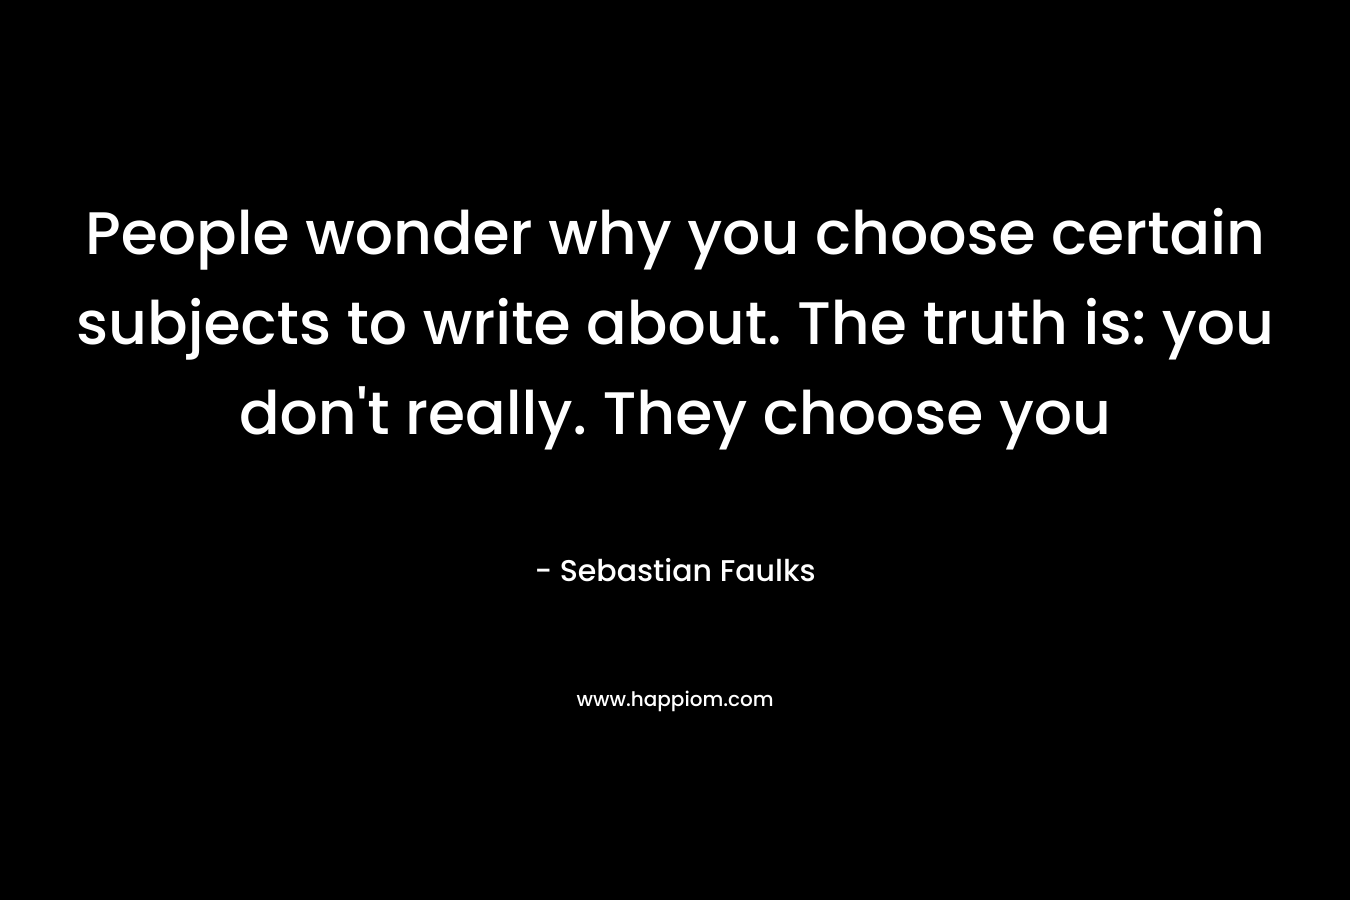 People wonder why you choose certain subjects to write about. The truth is: you don't really. They choose you